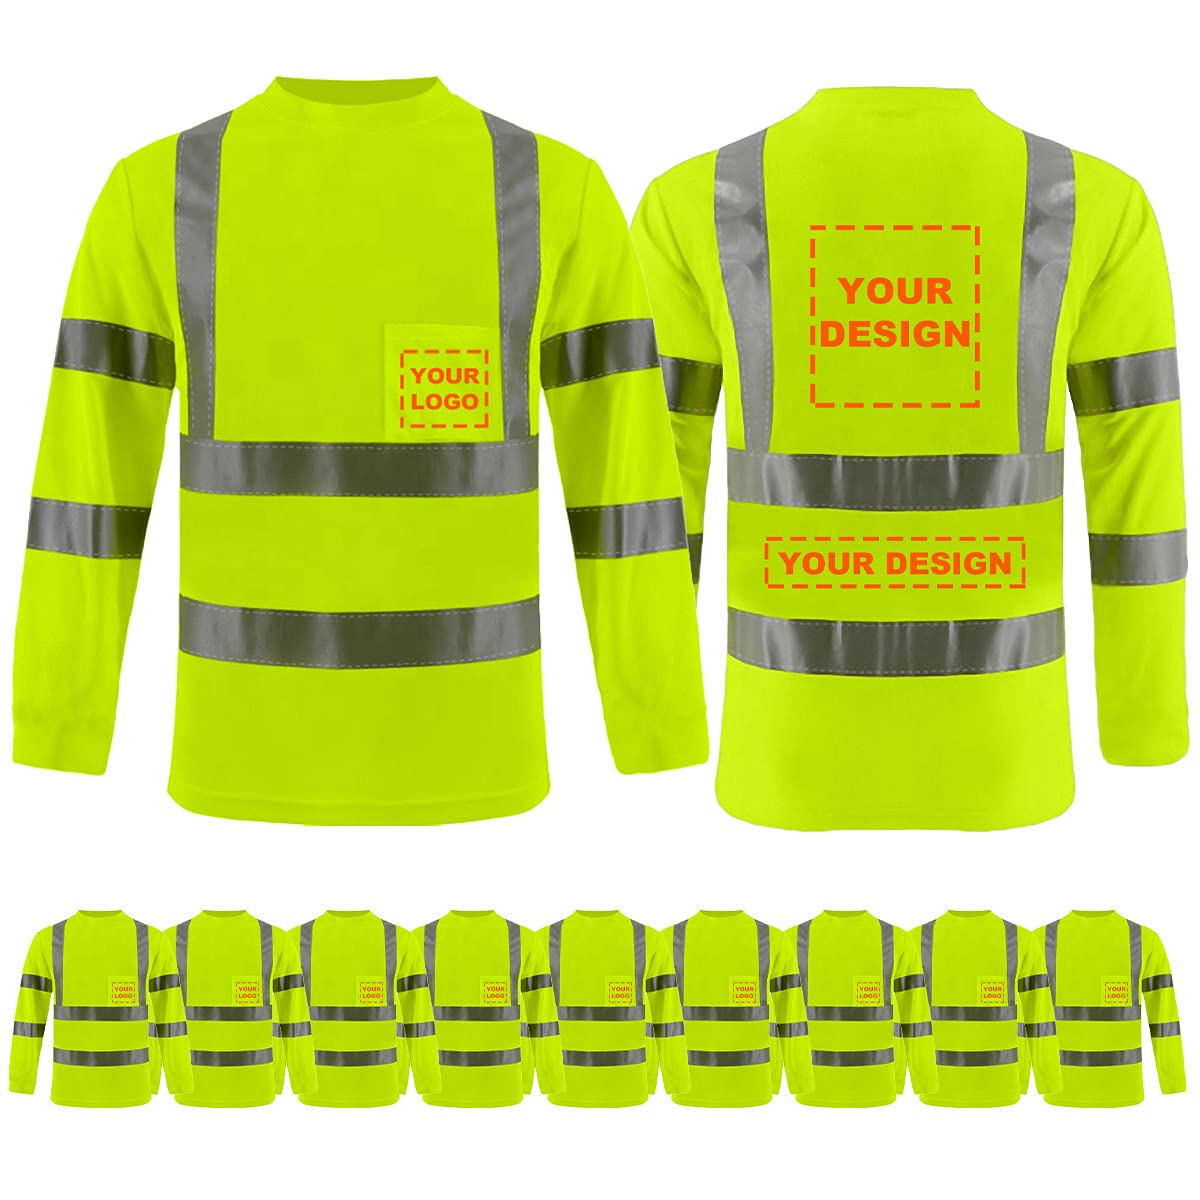 High Visibility Safety T-shirt  Short Sleeve Safety Shirts, Green